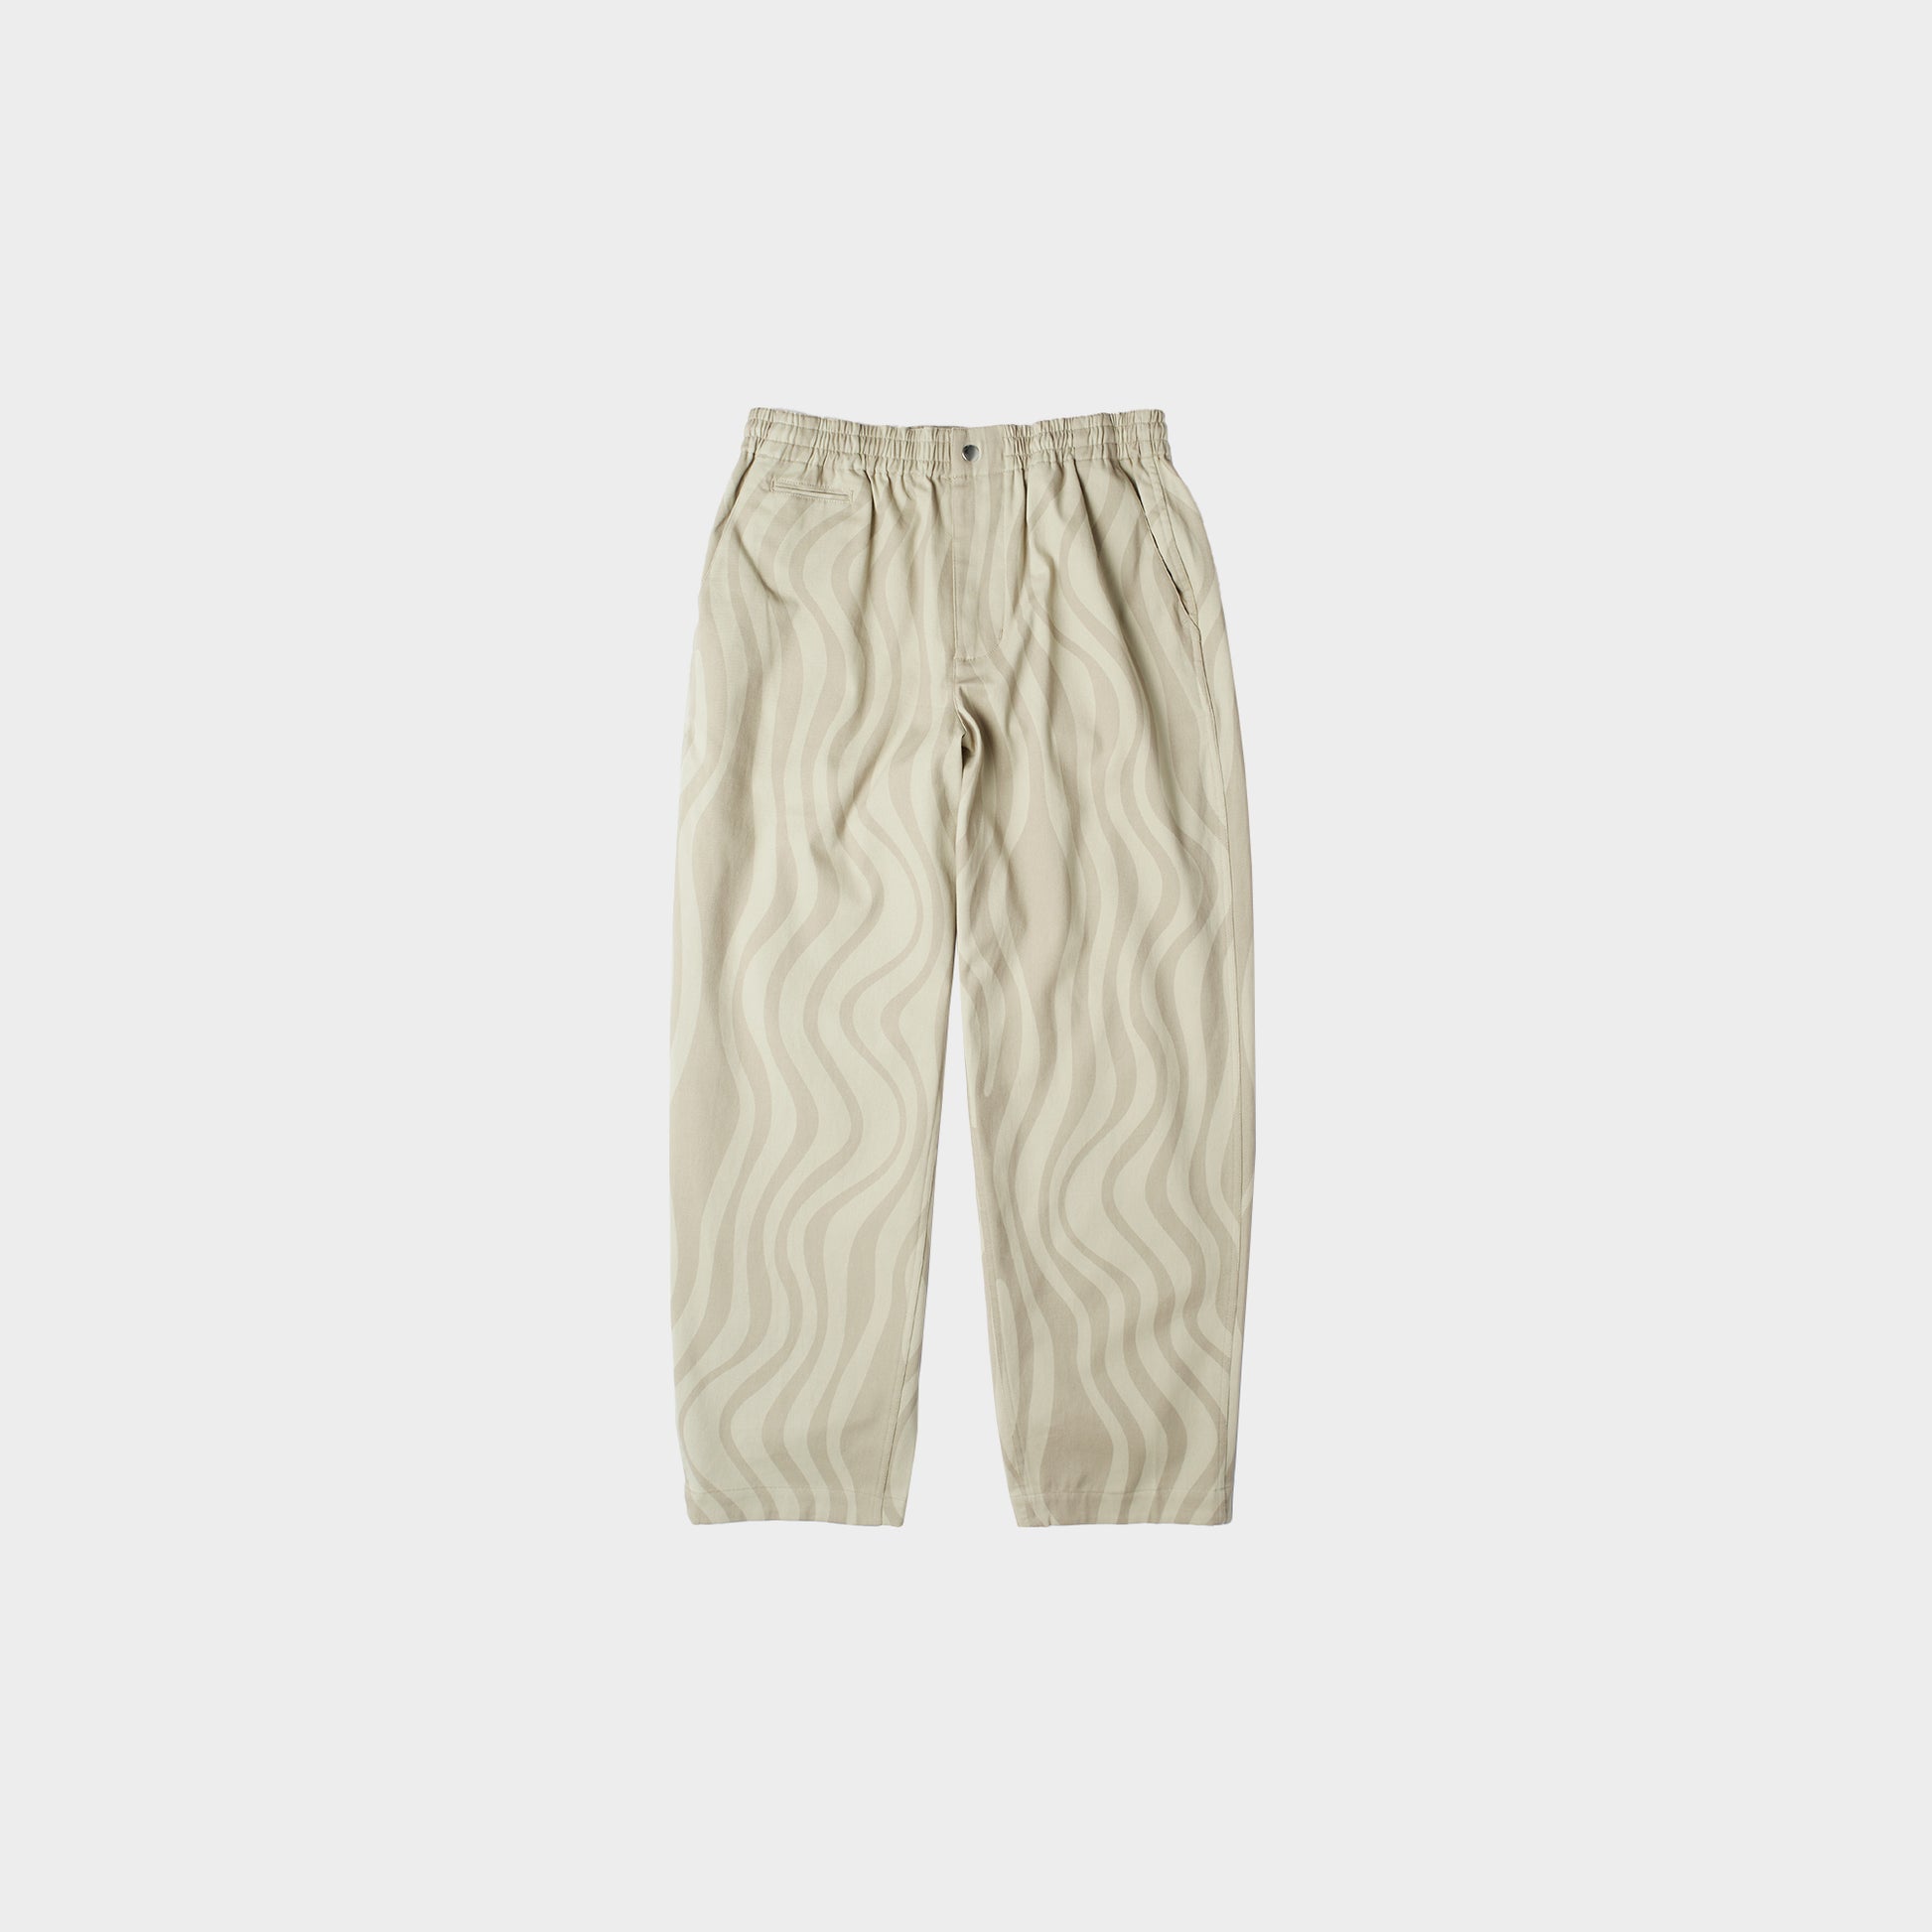 Parra Flowing Stripes Pants in Farbe tan